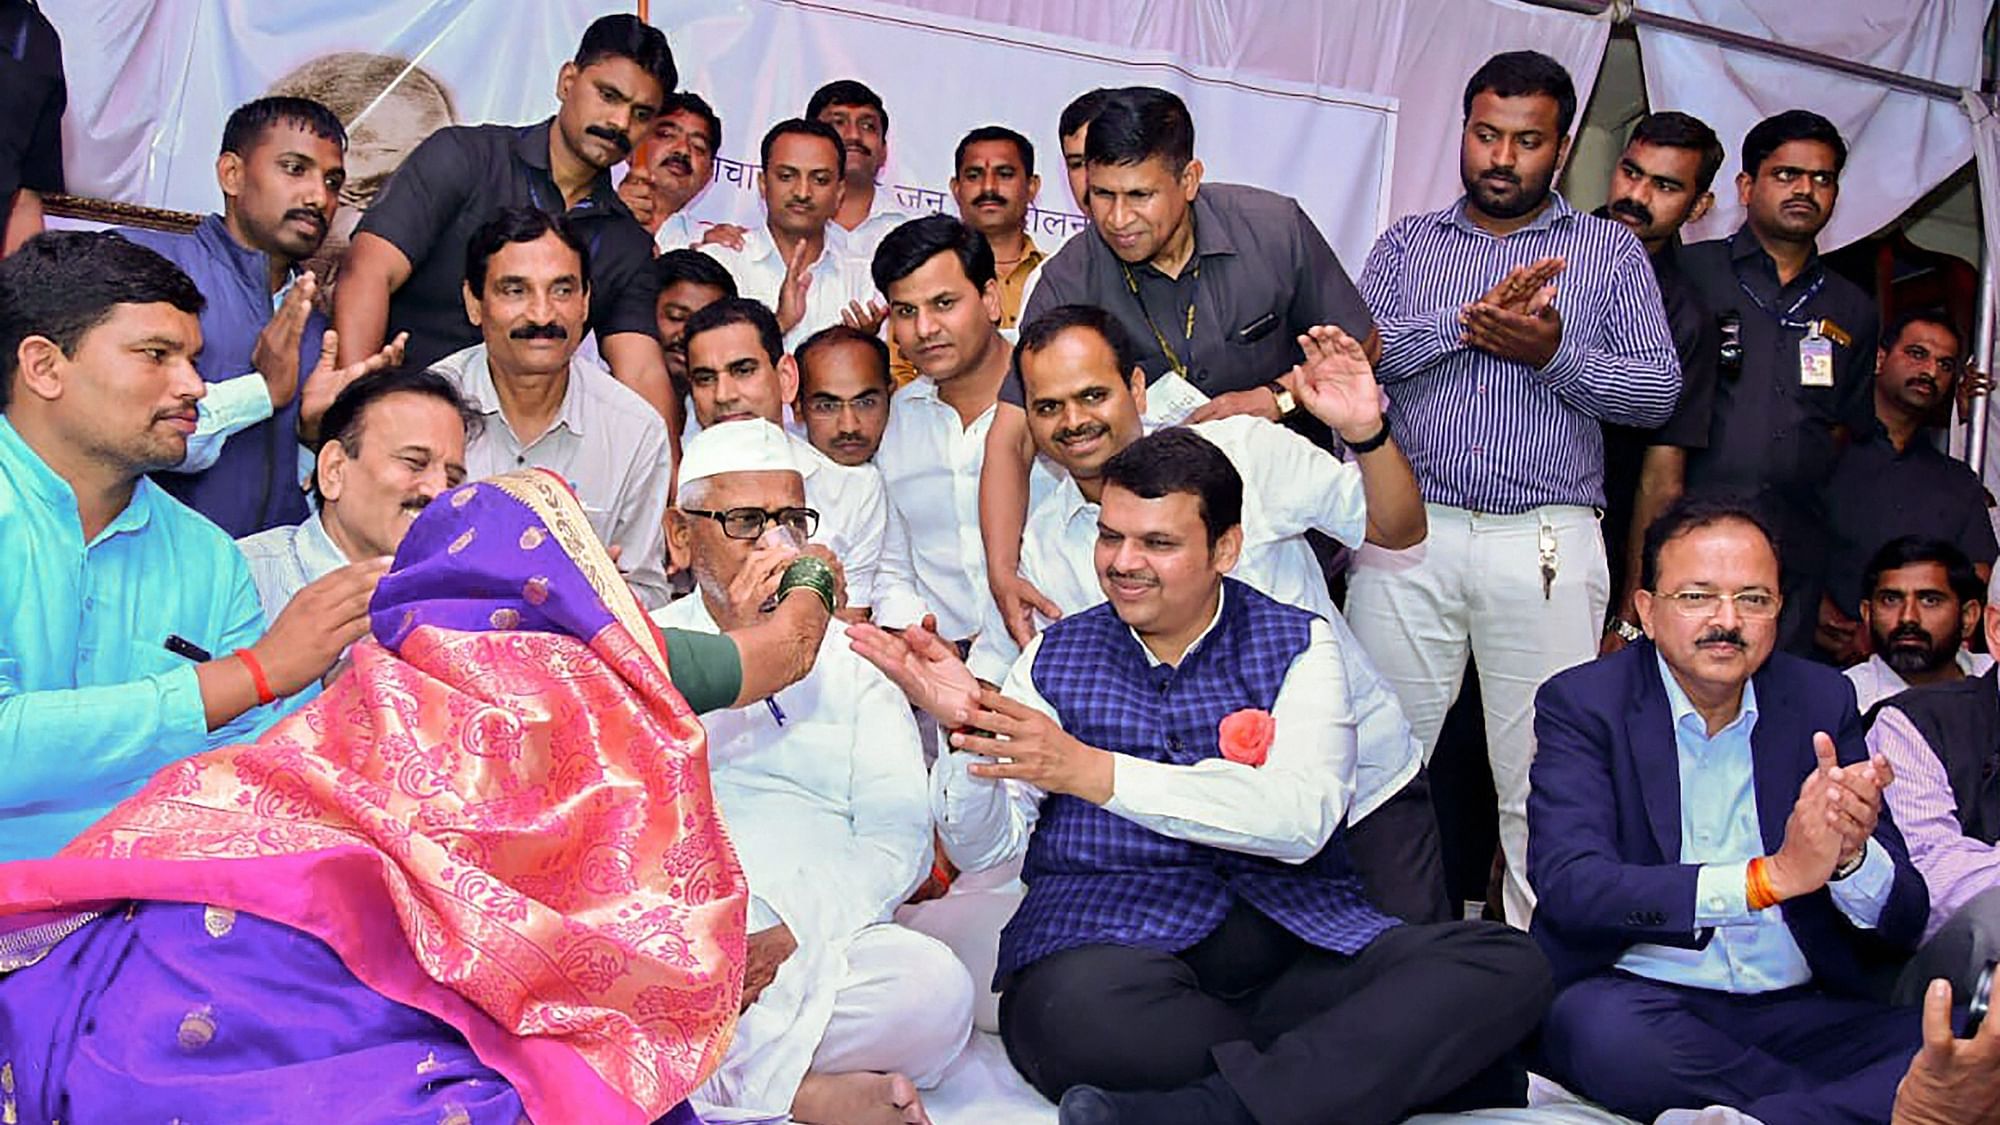 Anna Hazare ends his fast as Maharashtra Chief Minister Devendra Fadnavis and MoS for Defence Subhash Bhamre look on, in the village of Ralegan Siddhi, Ahmednagar.